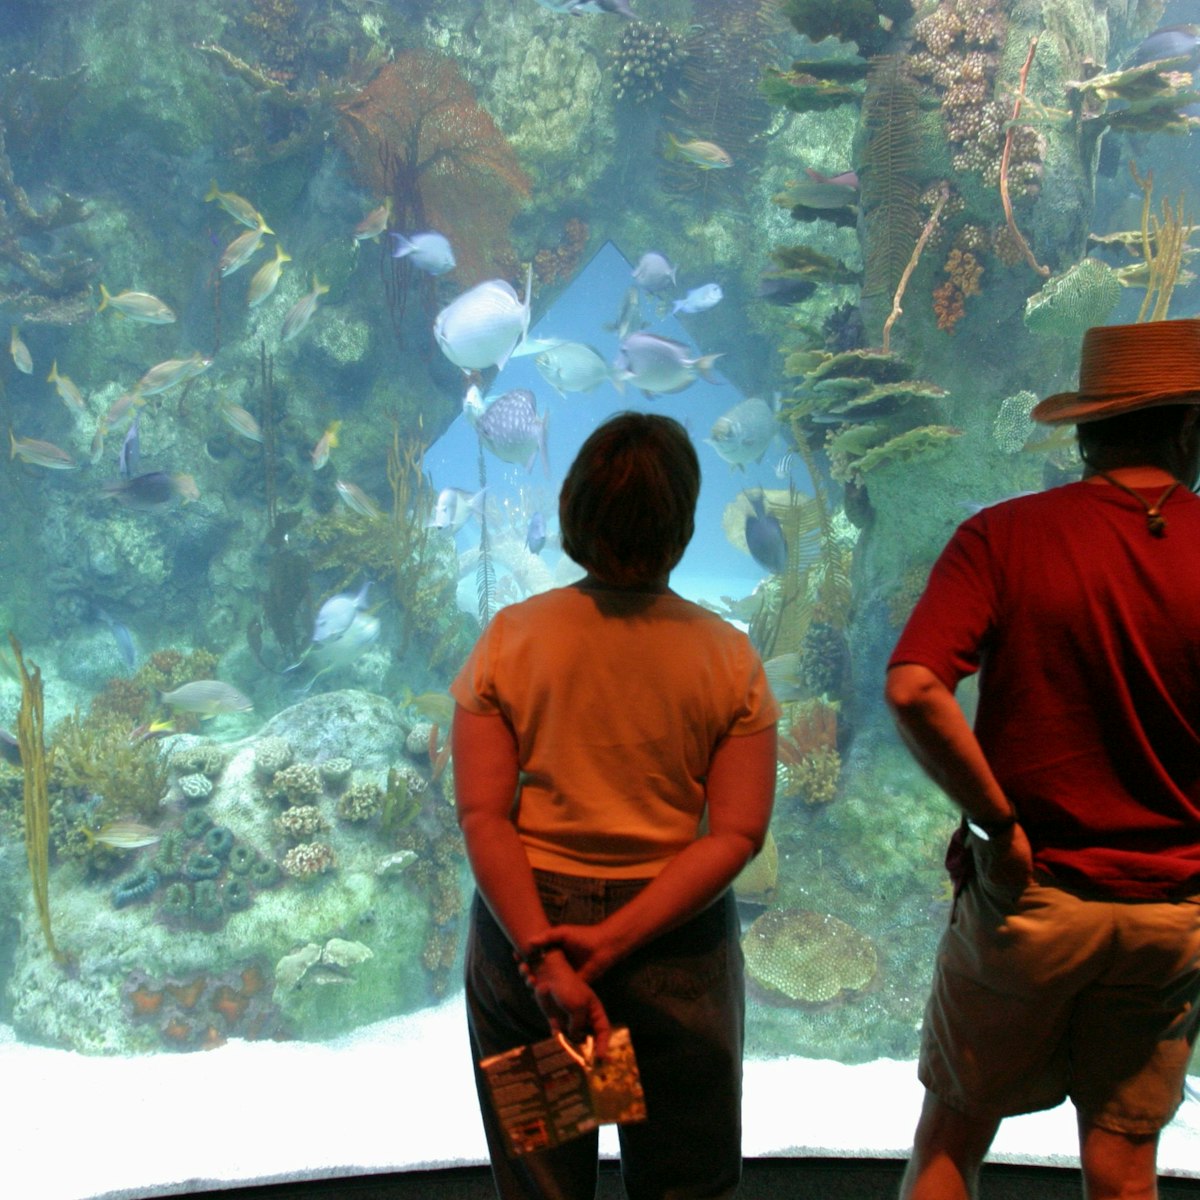 A couple looking at the 285,000 gallon shark tank at the Aquarium in Biological Park. (Photo by: Jeffrey Greenberg/Universal Images Group via Getty Images)
ABQ BioPark Aquarium
